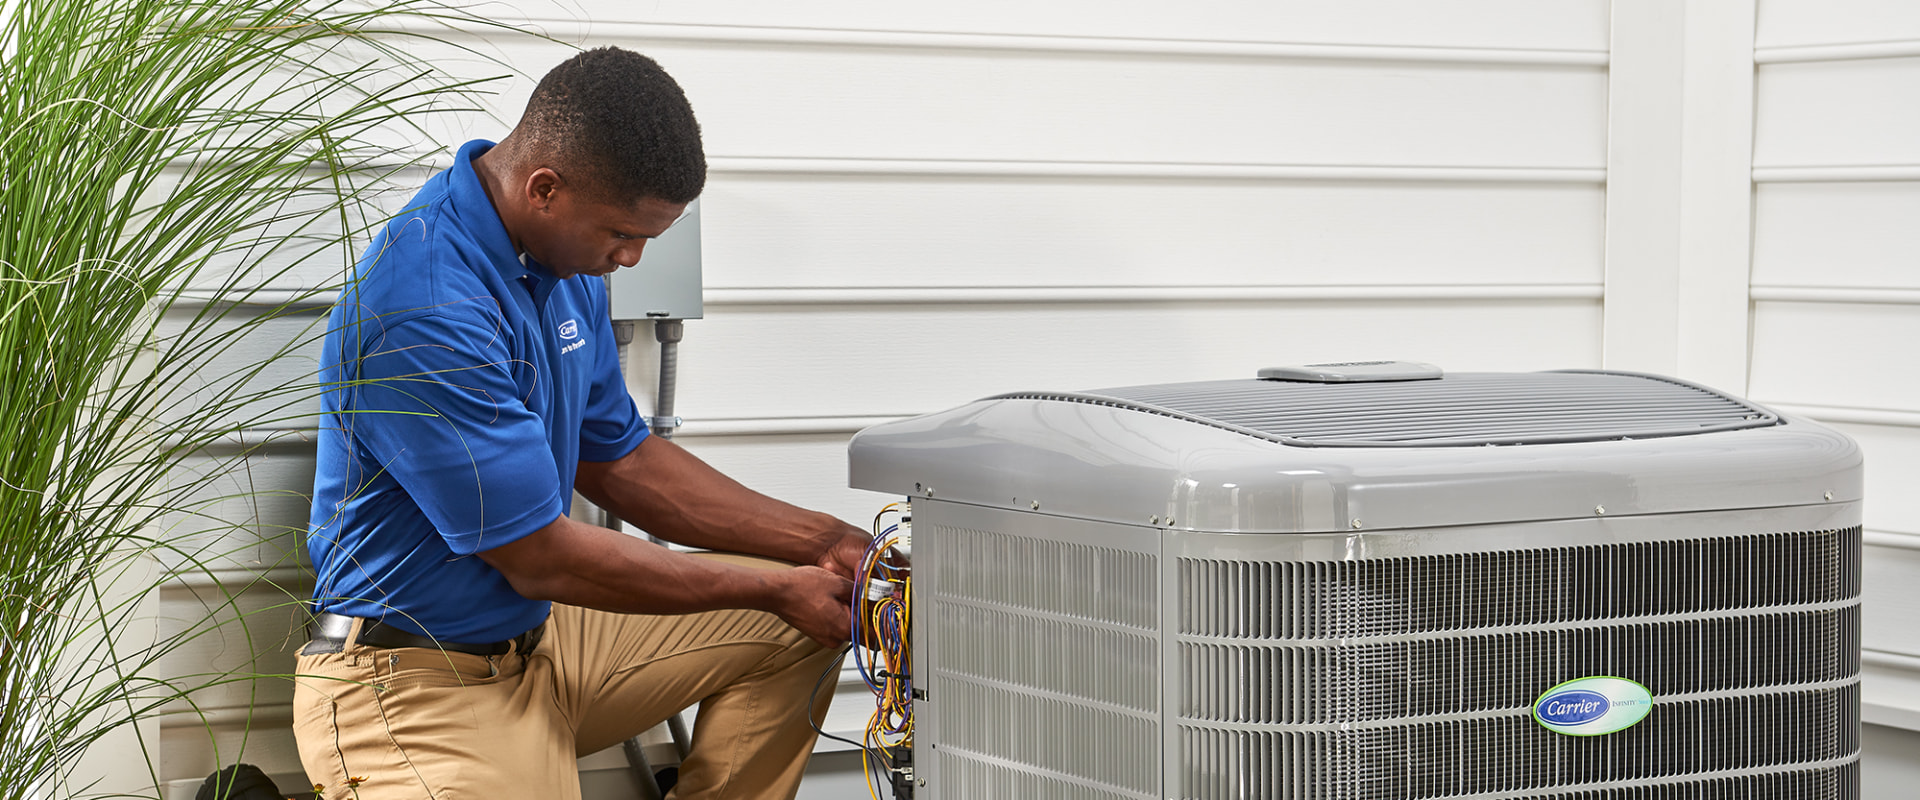 How Long Does an AC Condenser Last? - A Comprehensive Guide